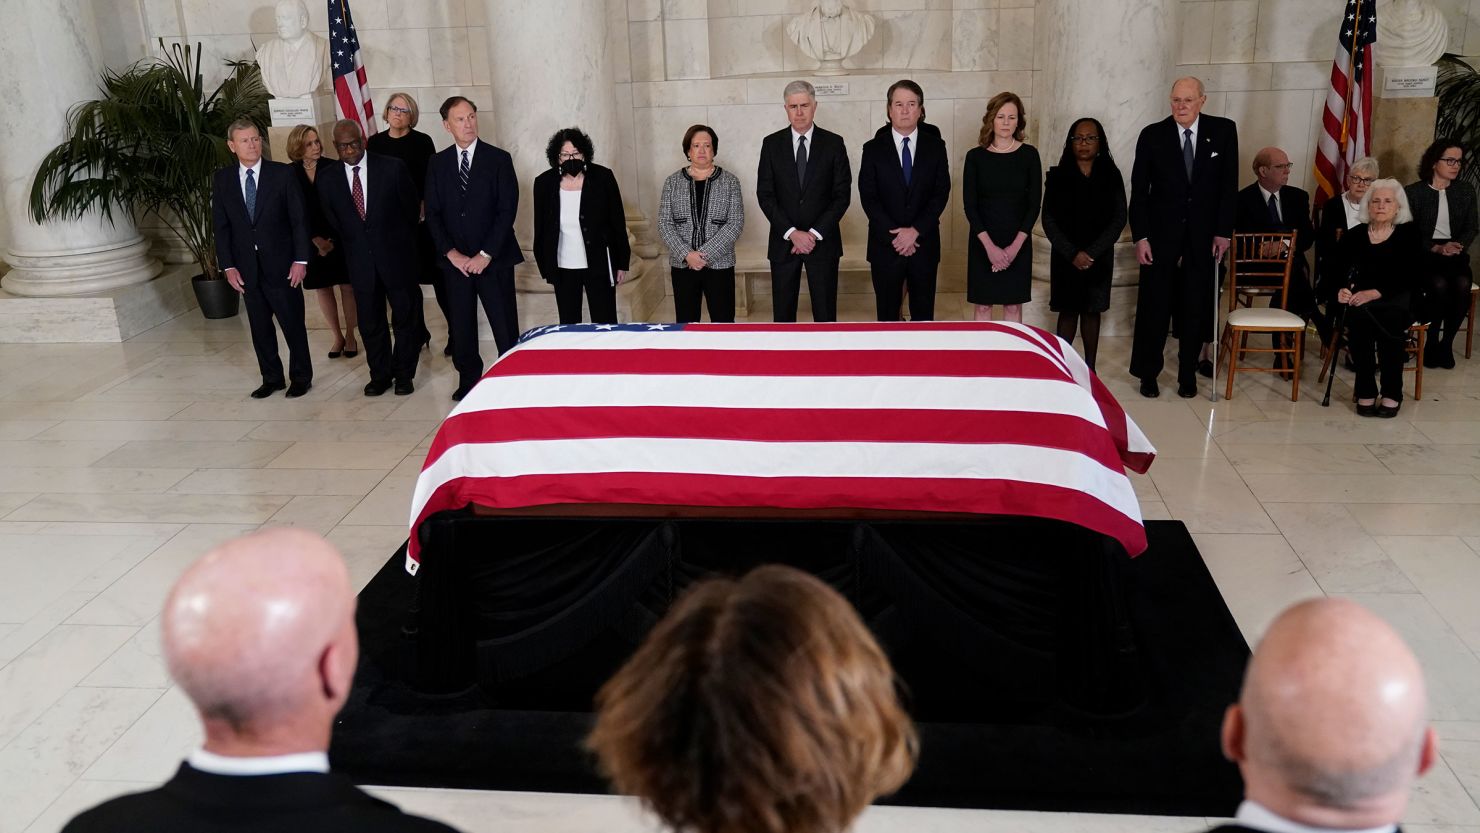 From left, Chief Justice of the United States John Roberts, Justice Clarence Thomas, Justice Samuel Alito, Justice Sonia Sotomayor Justice Elena Kagan, Justice Neil Gorsuch, Justice Brett Kavanaugh, Justice Amy Coney Barrett, Justice Ketanji Brown Jackson and retired Justice Anthony Kennedy, stand as the flag-draped casket of retired Supreme Court Justice Sandra Day O'Connor arrives at the Supreme Court in Washington, DC, on Monday, December 18. 